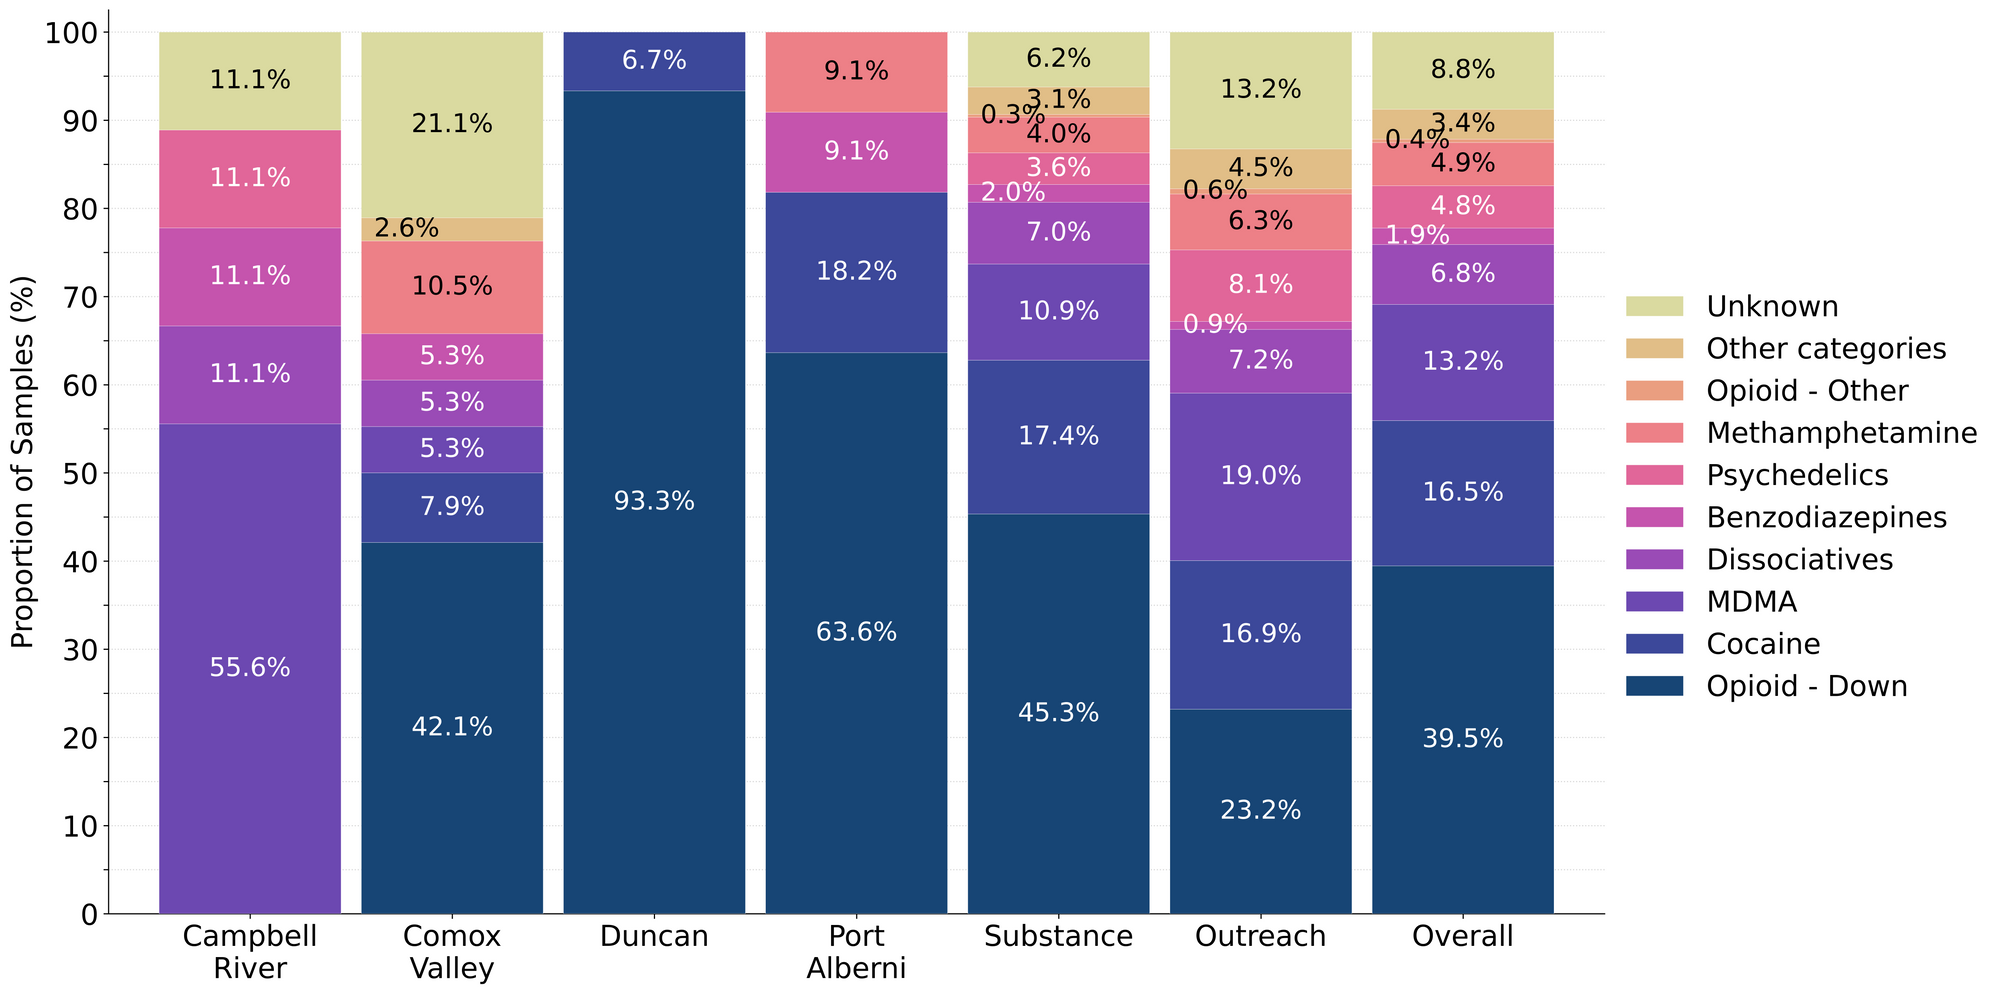 Figure 1. Prevalence of drug classes checked during June split by sample collection/method. Bars are stacked by the percentage of samples in each drug class.